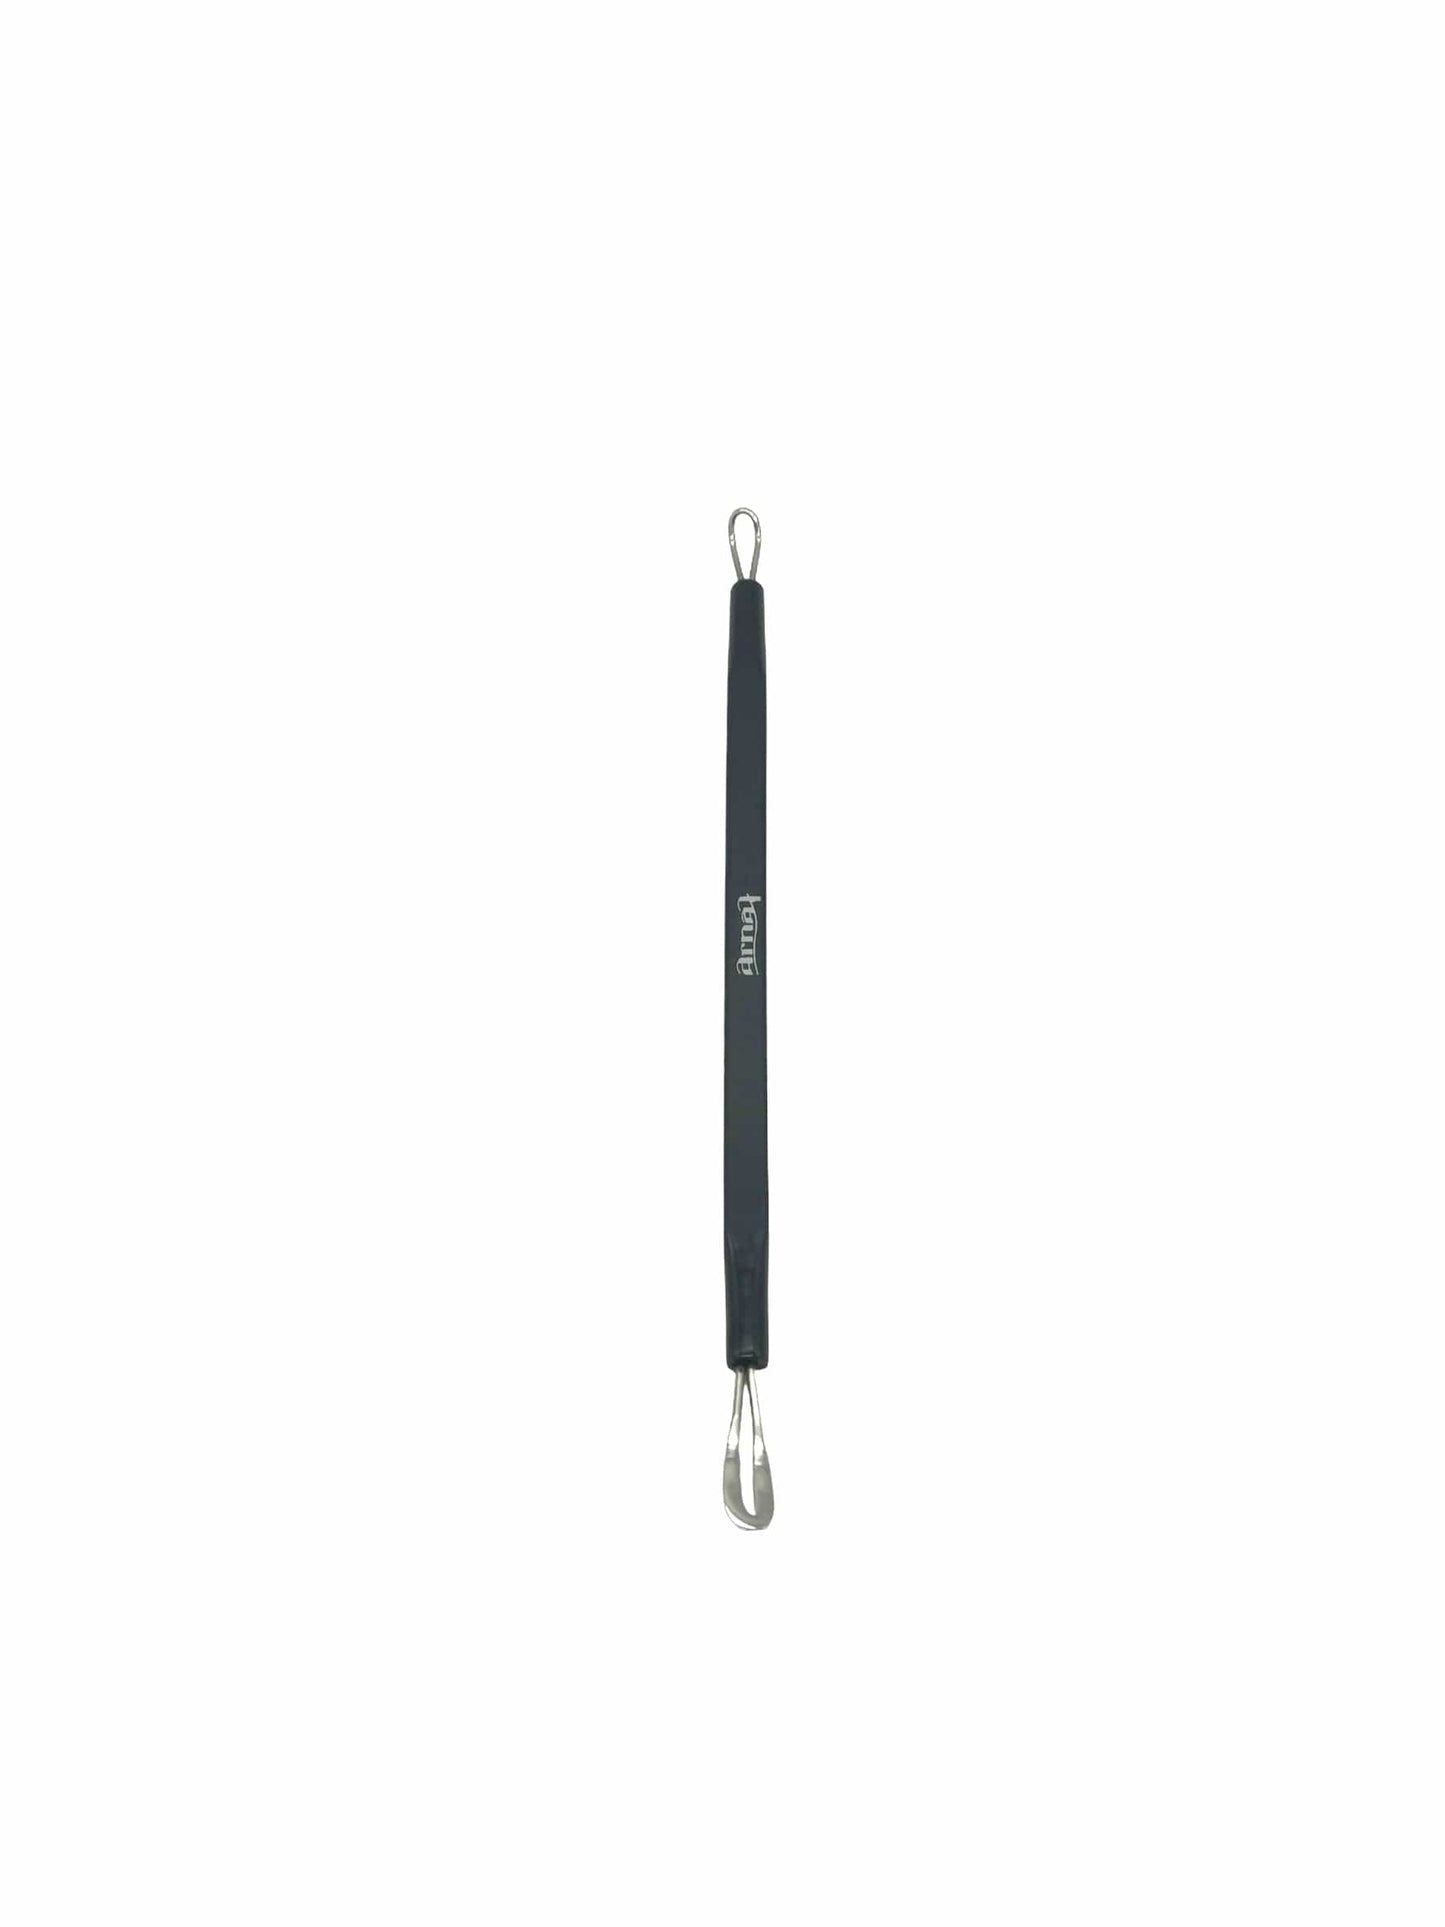 Blackheads Remover Stainless Steel Skin Care Tool Blackheads Extractor